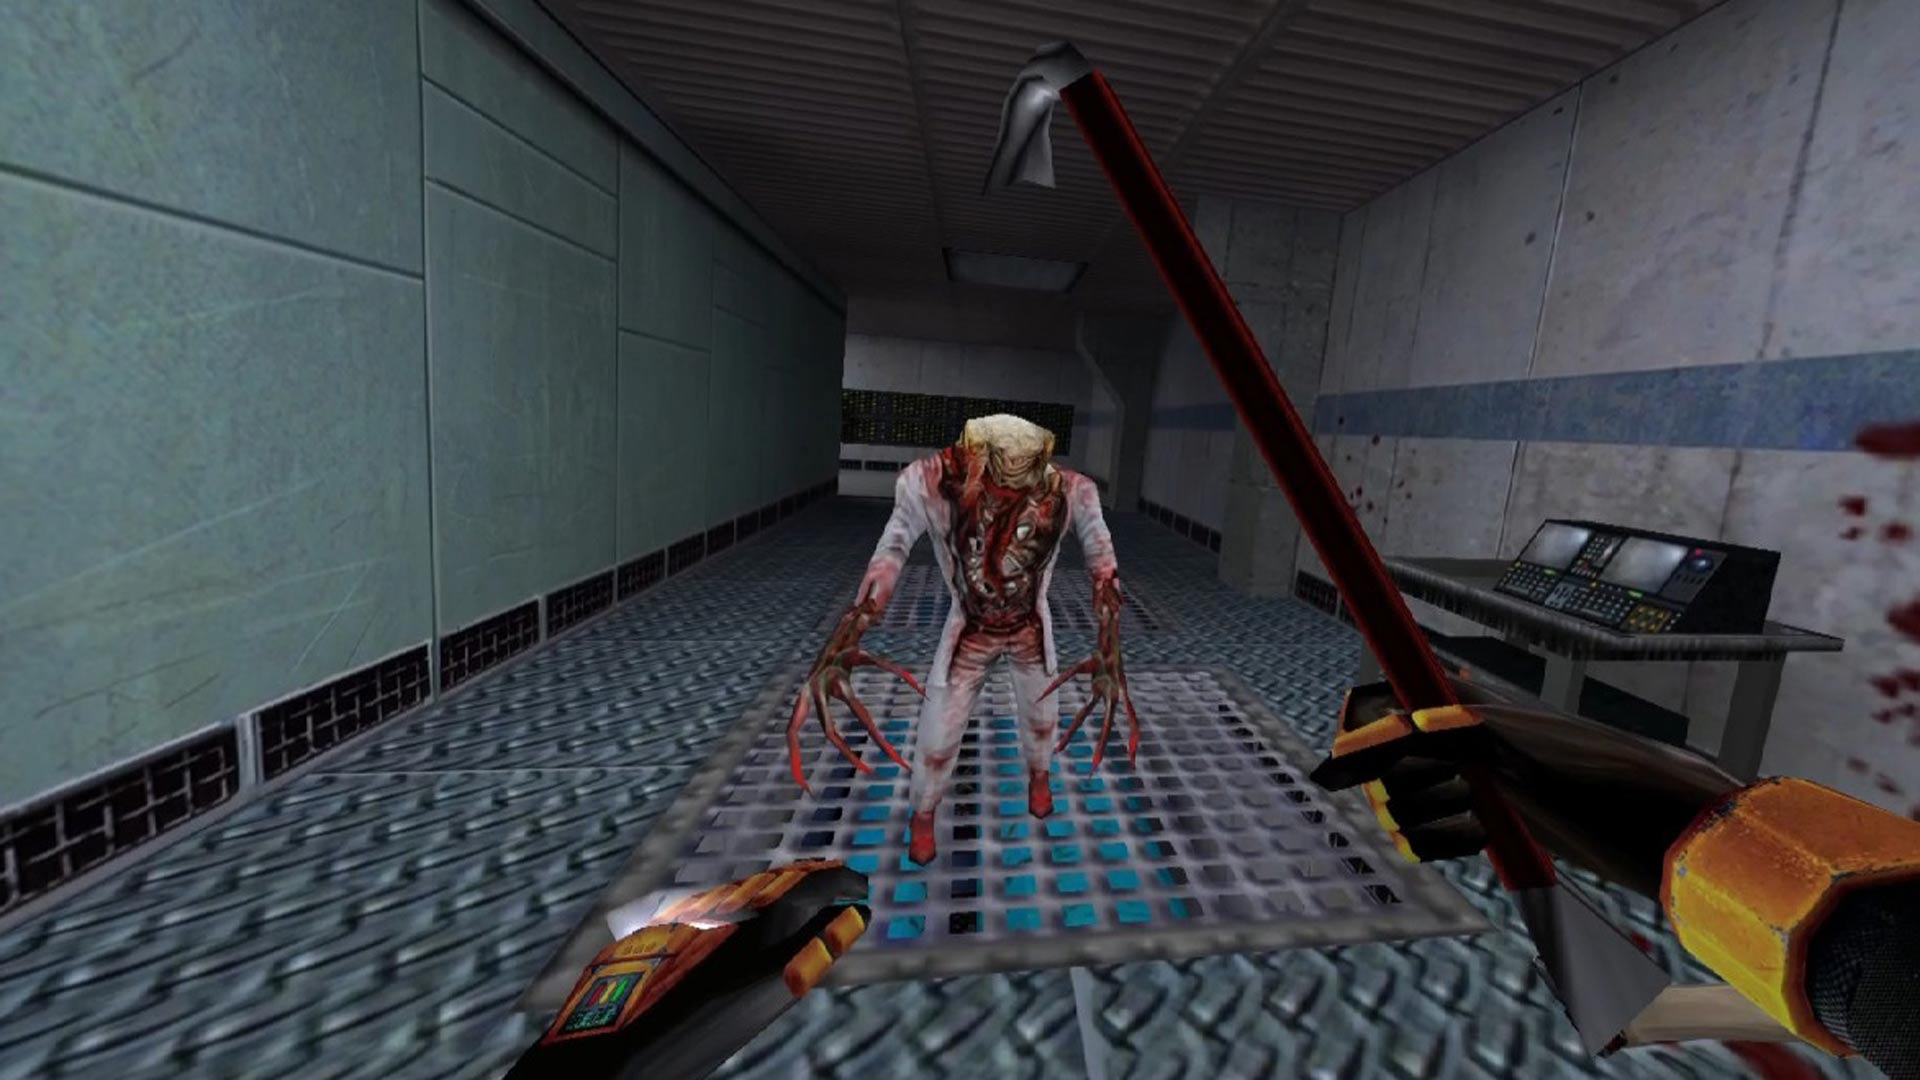 Unofficial ‘Half-Life’ VR Mod is Coming to Steam October 20th – Road to VR